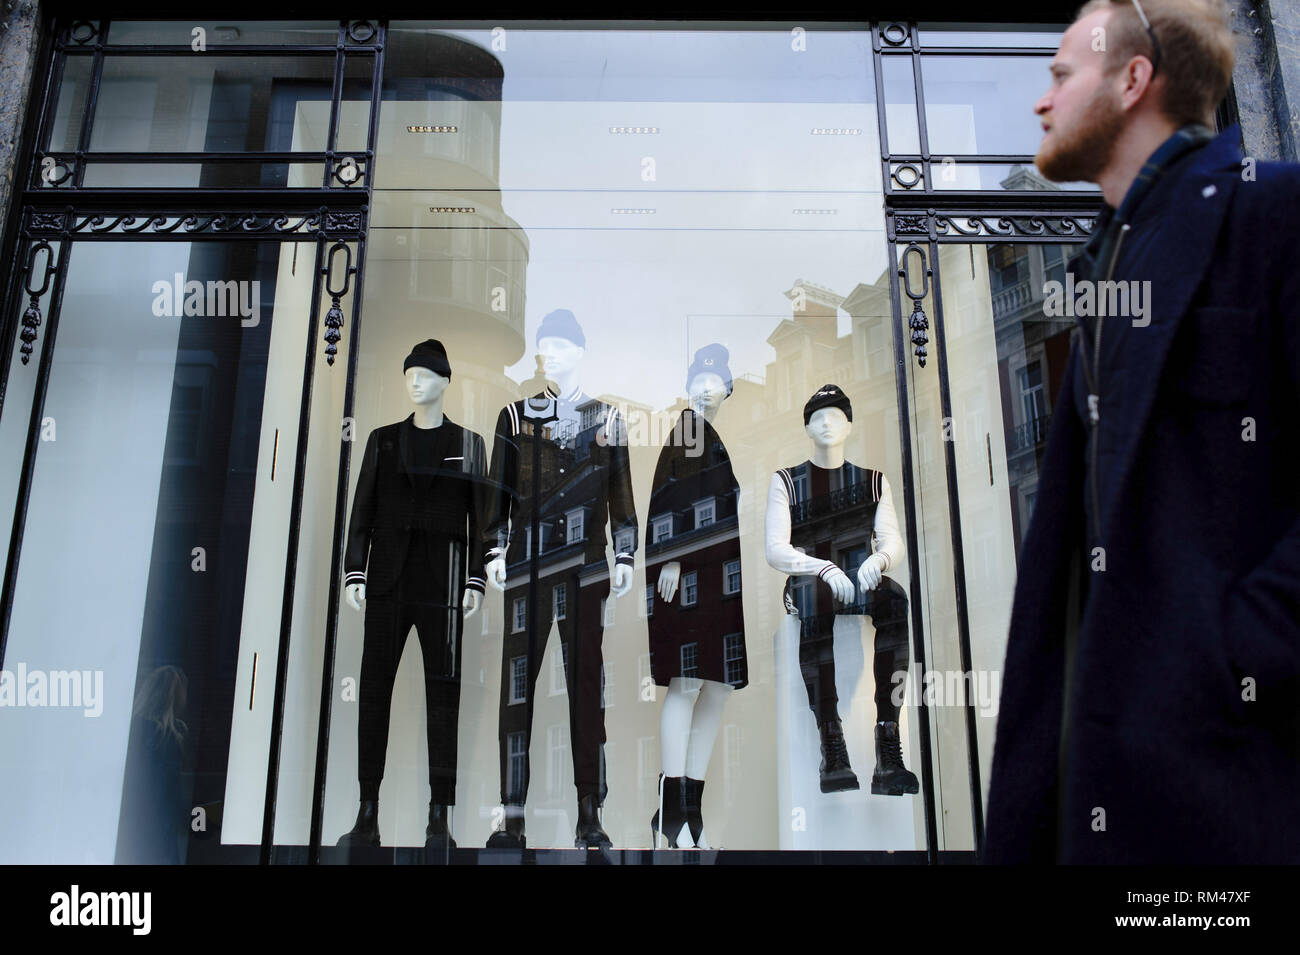 February 9, 2019 - London, United Kingdom - A man seen walking past mannequins in the window of a clothing store on Conduit Street in central London. .February 15 sees the release of the first monthly retail sales figures of the year (for January) from the UK's Office for National Statistics. December figures revealed a 0.9 percent fall in sales from the month before, which saw a 1.4 percent rise widely attributed to the impact of 'Black Friday' deals encouraging earlier Christmas shopping. More generally, with a potential no-deal departure from the EU growing nearer and continuing to undermin Stock Photo